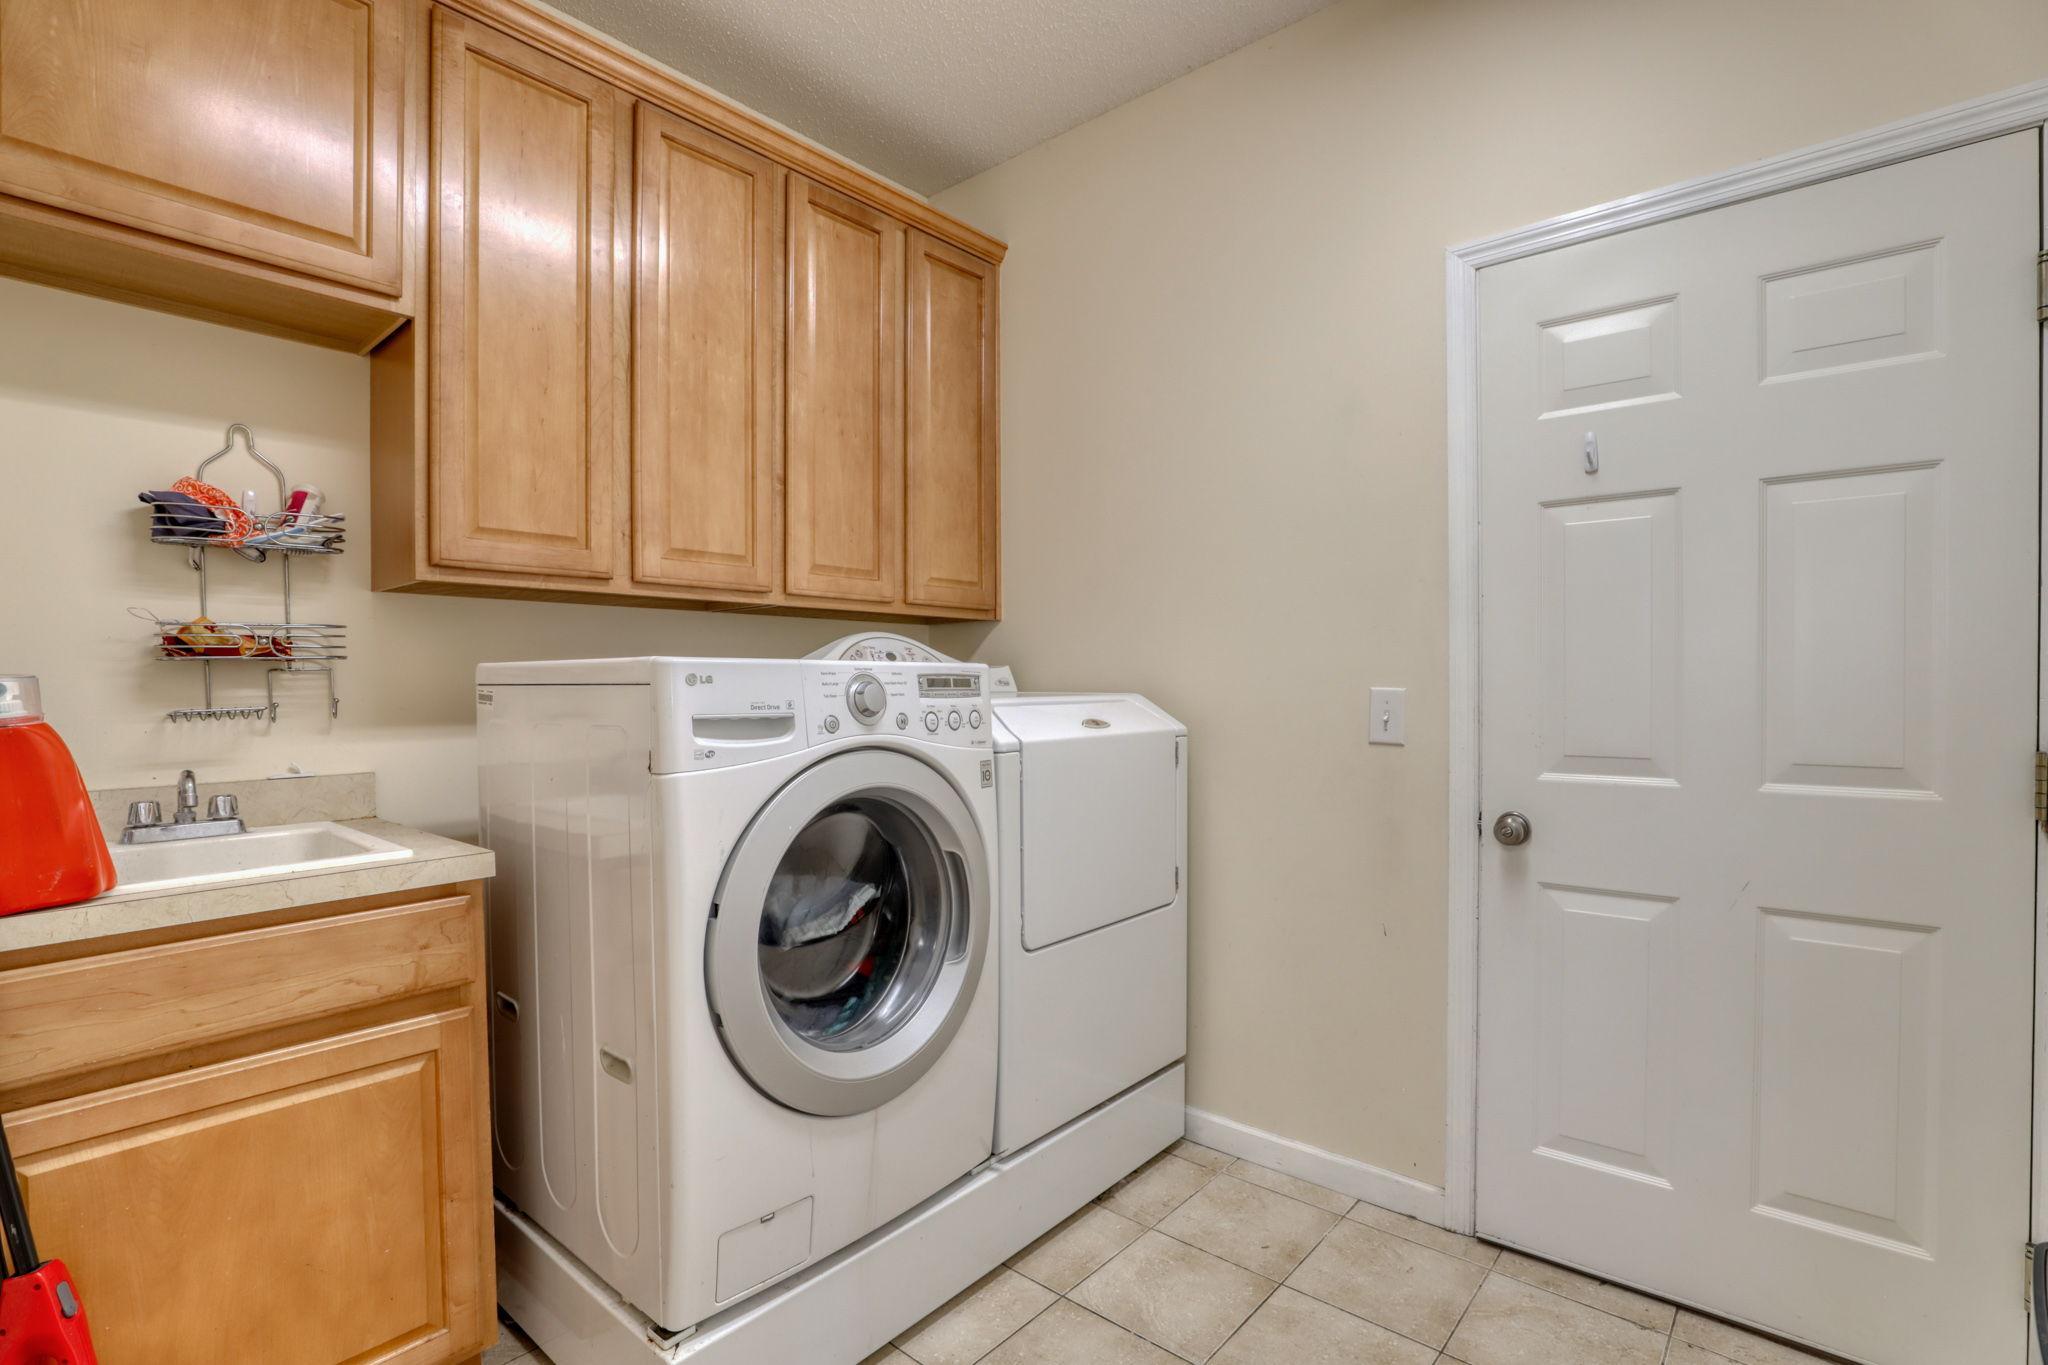 Laundry/mud room between kitchen and garage.